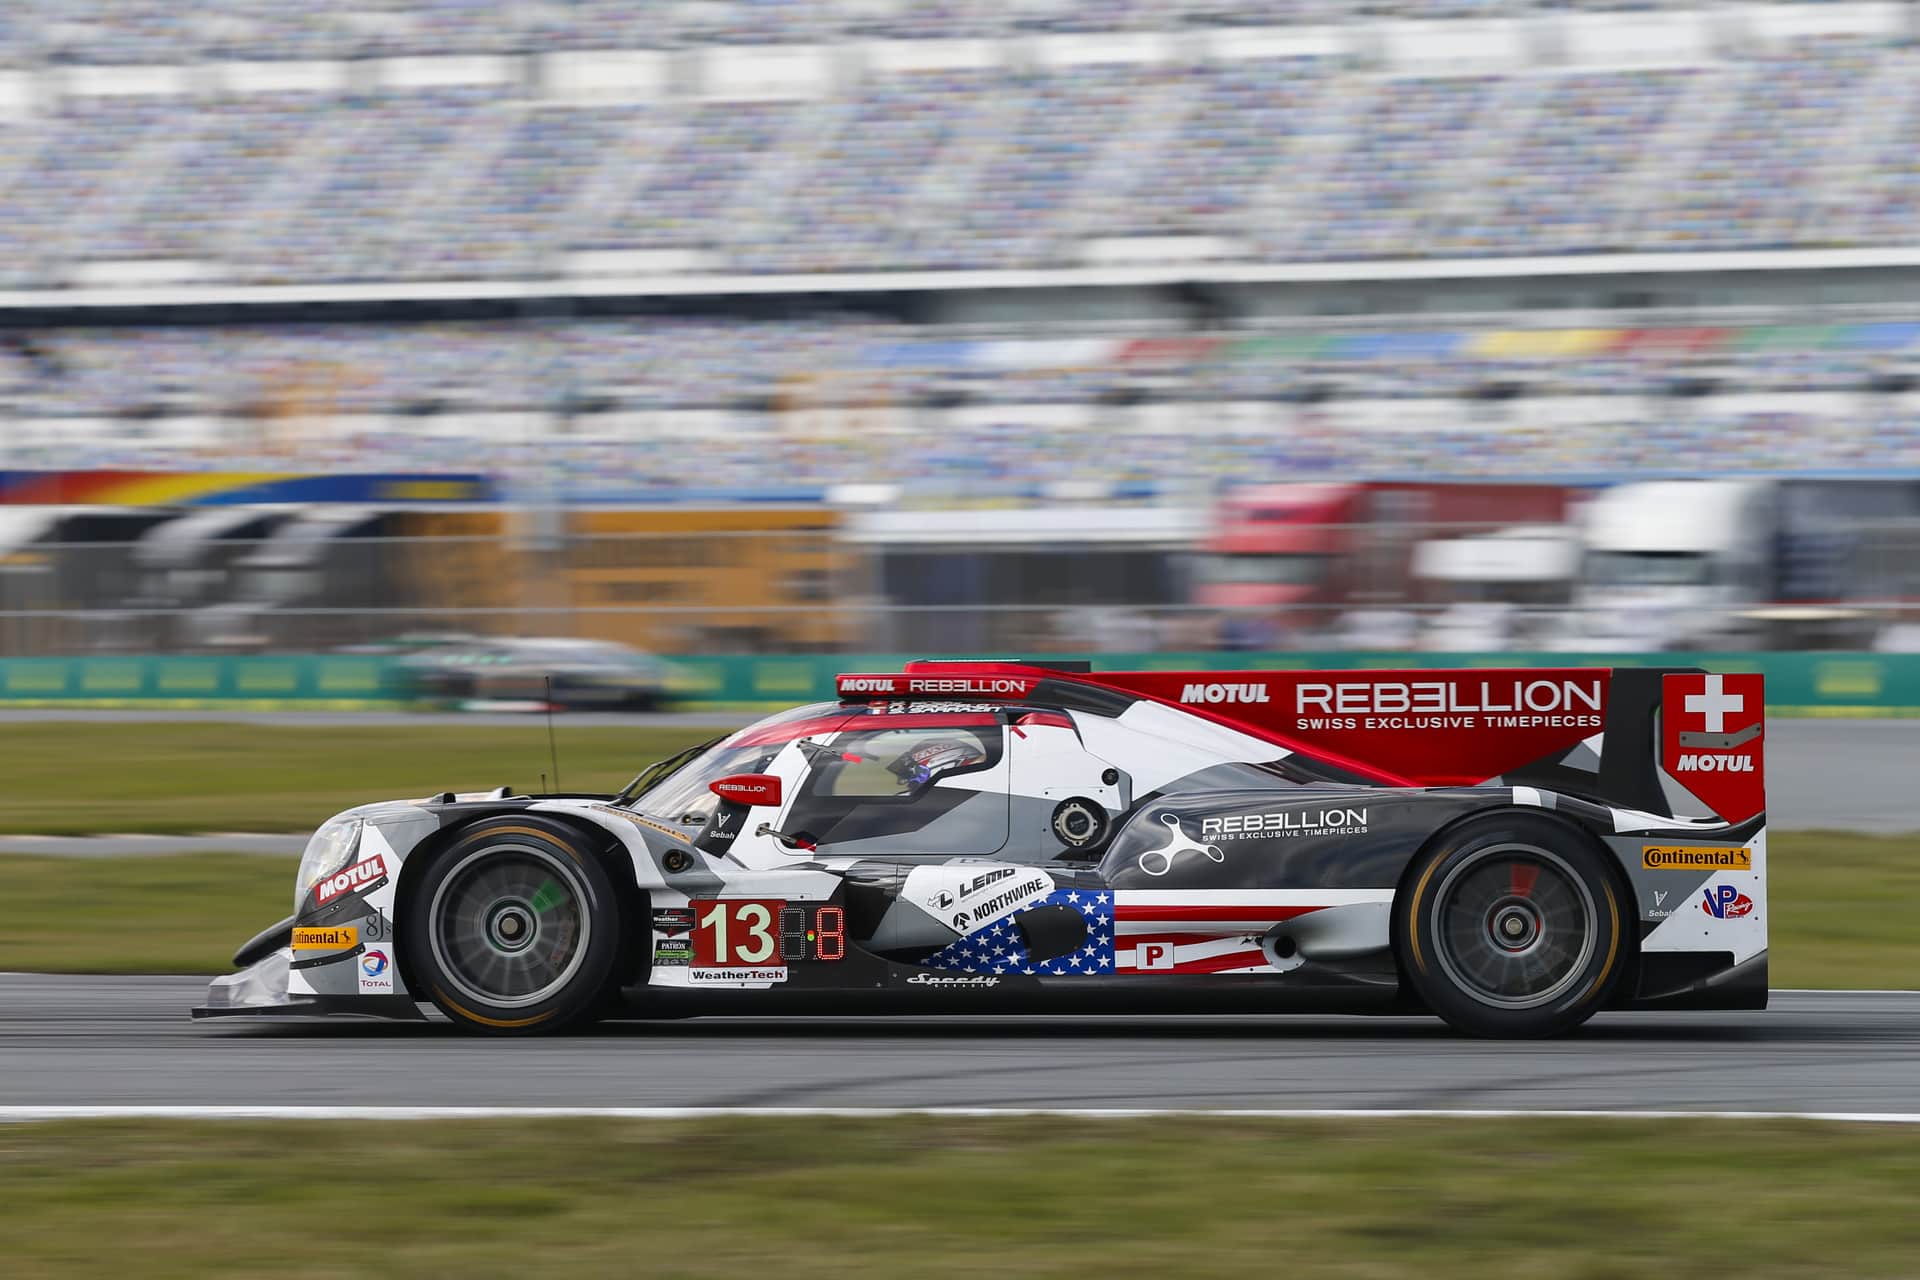 No superstition: As at the LMP2 premiere at Daytona, Rebellion will start this year with car number 13 on one of the two cars (Photo: IMSA).